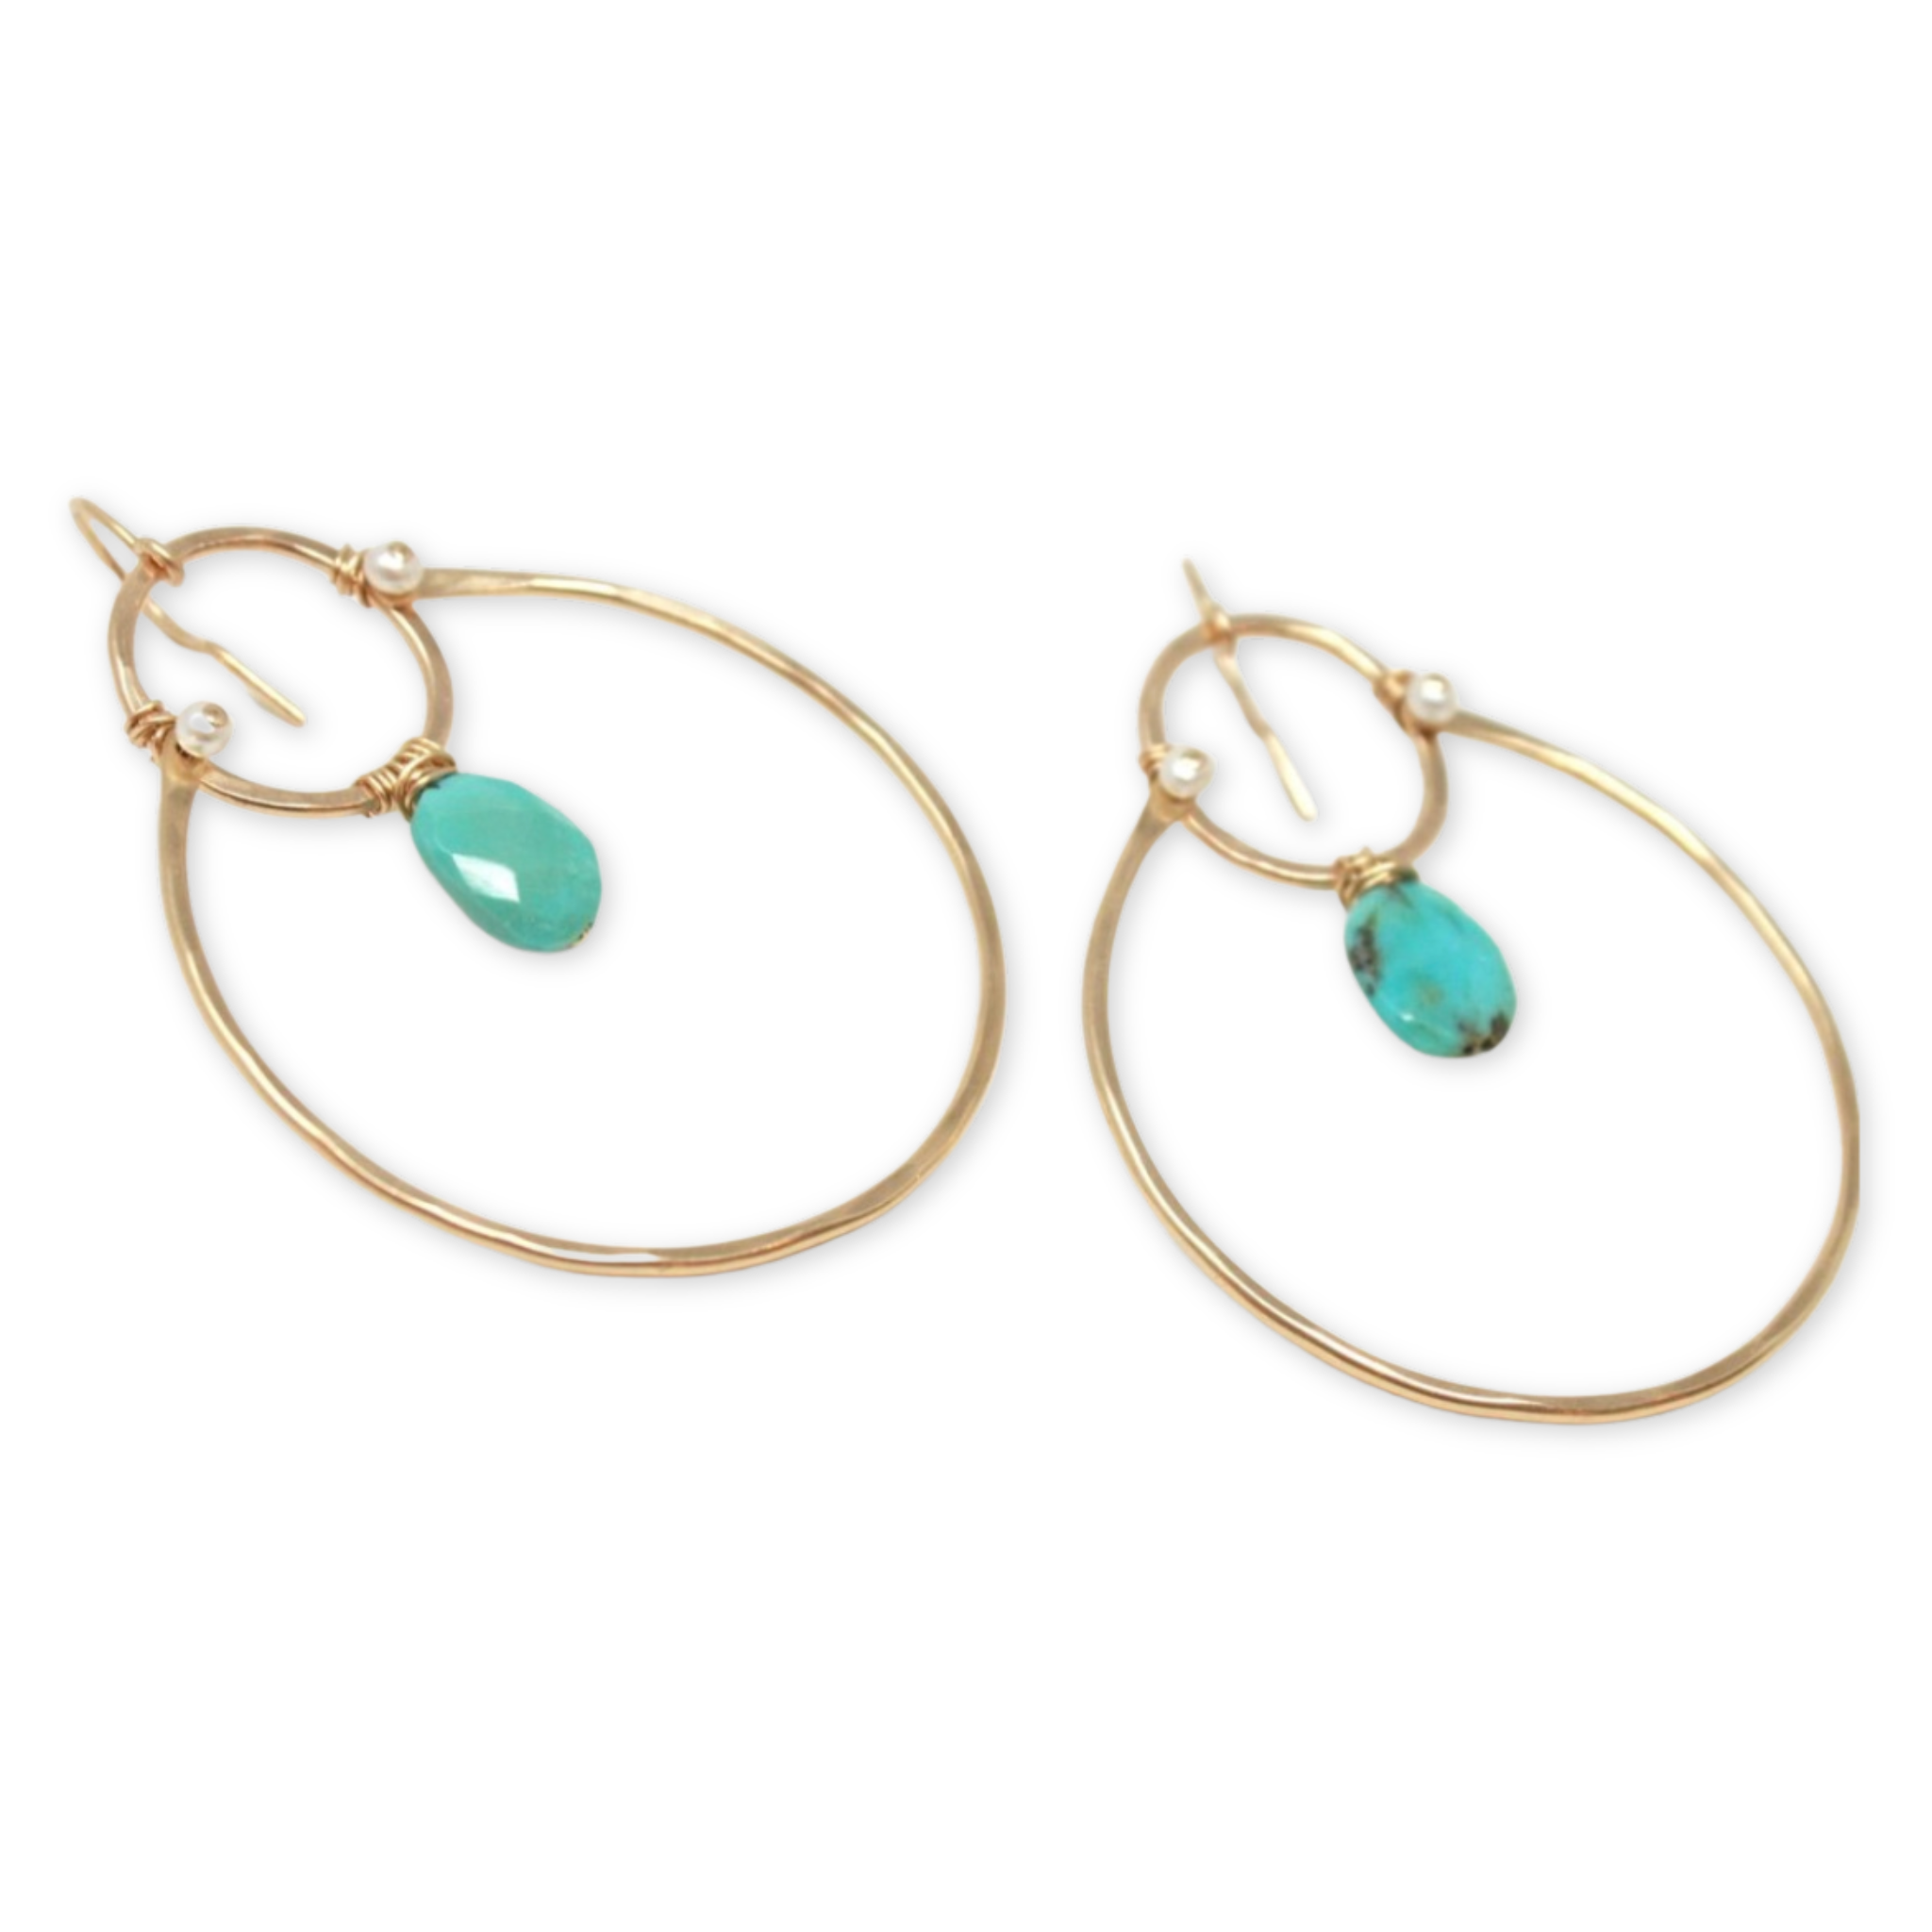 oval earrings with fresh water pearls and sleeping beauty turquoise stones